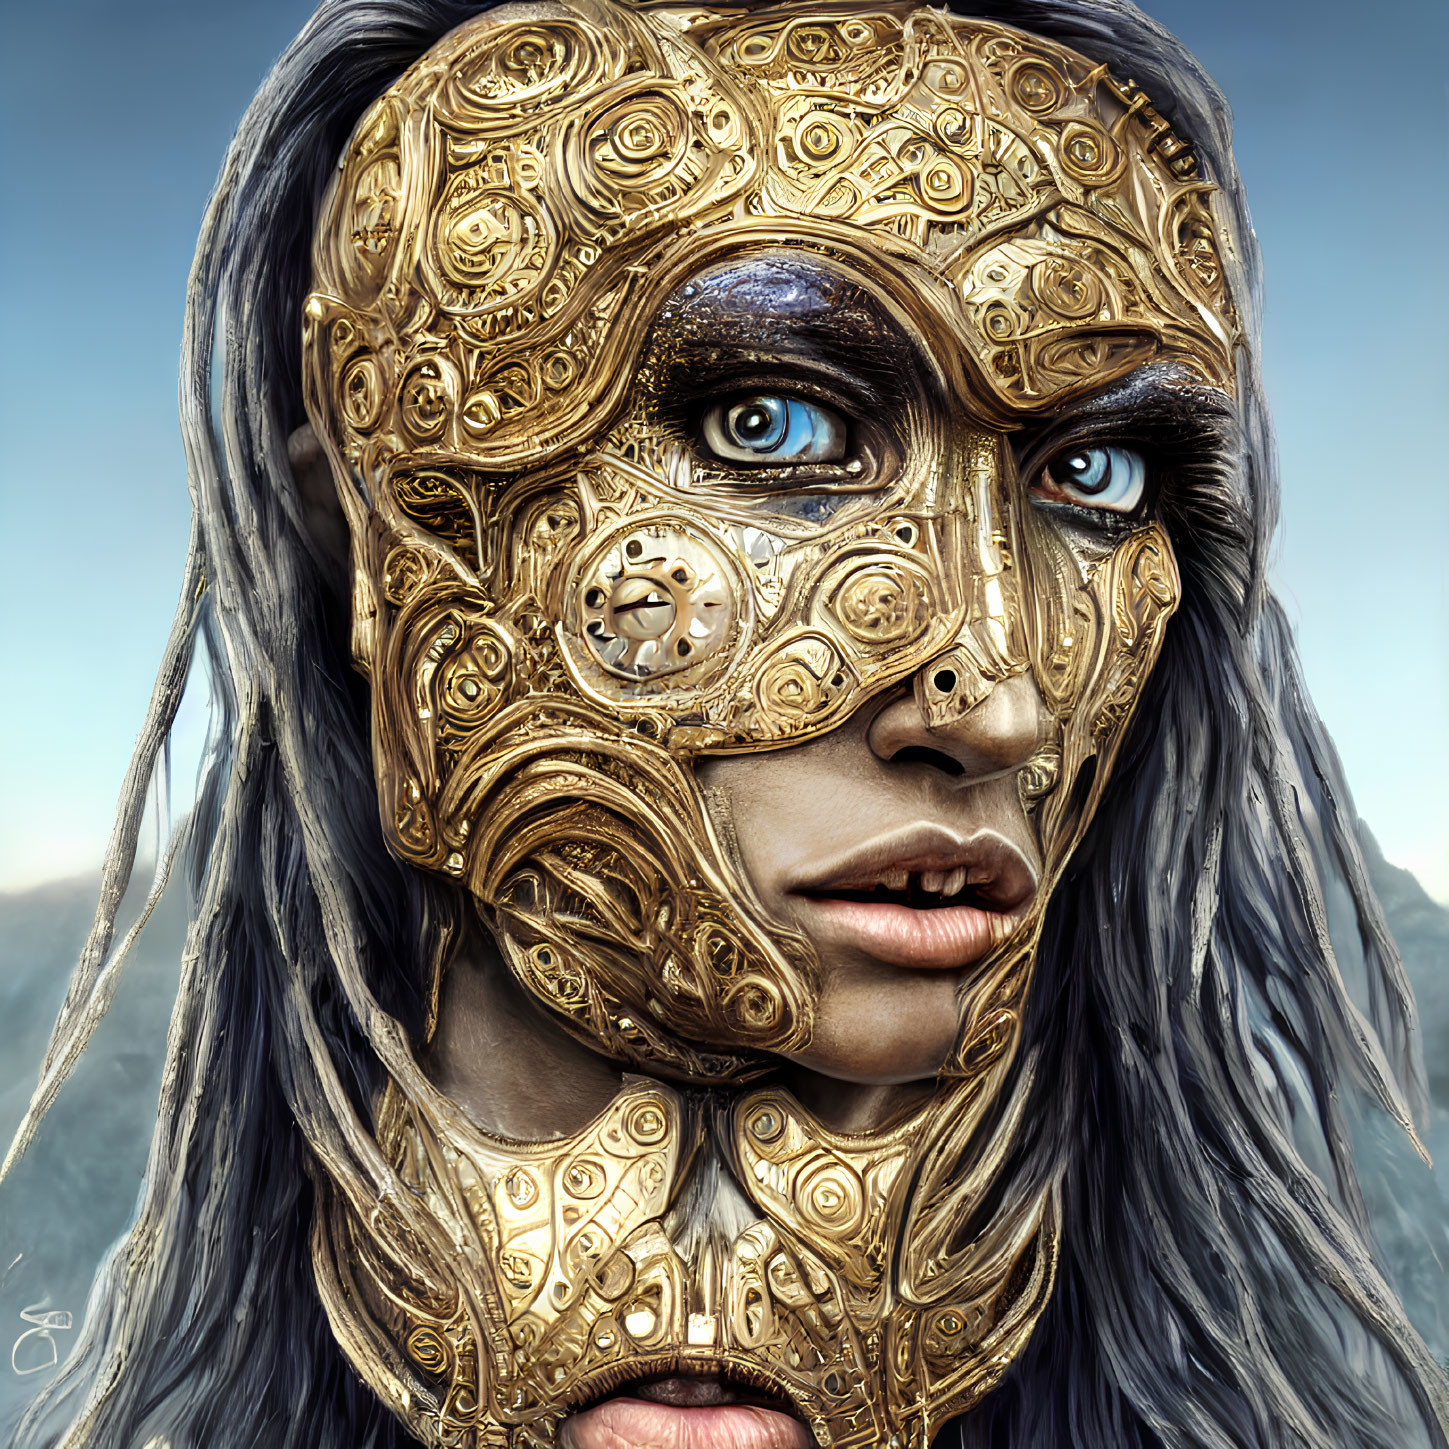 Detailed Portrait: Human Face with Golden Mechanical Mask